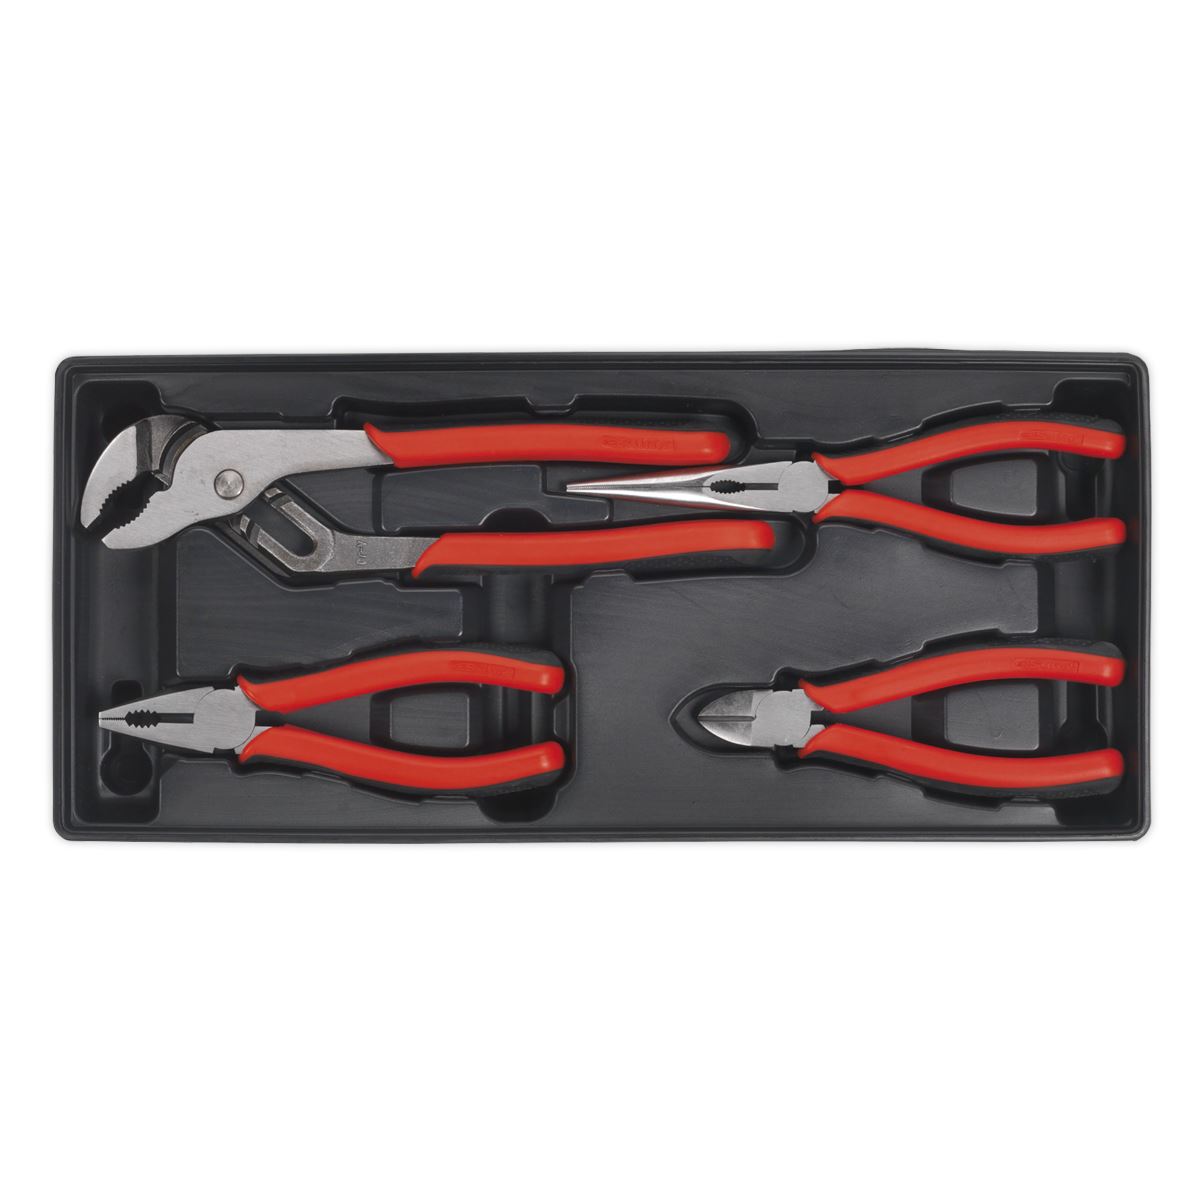 Sealey Premier Tool Tray with Pliers Set 4pc